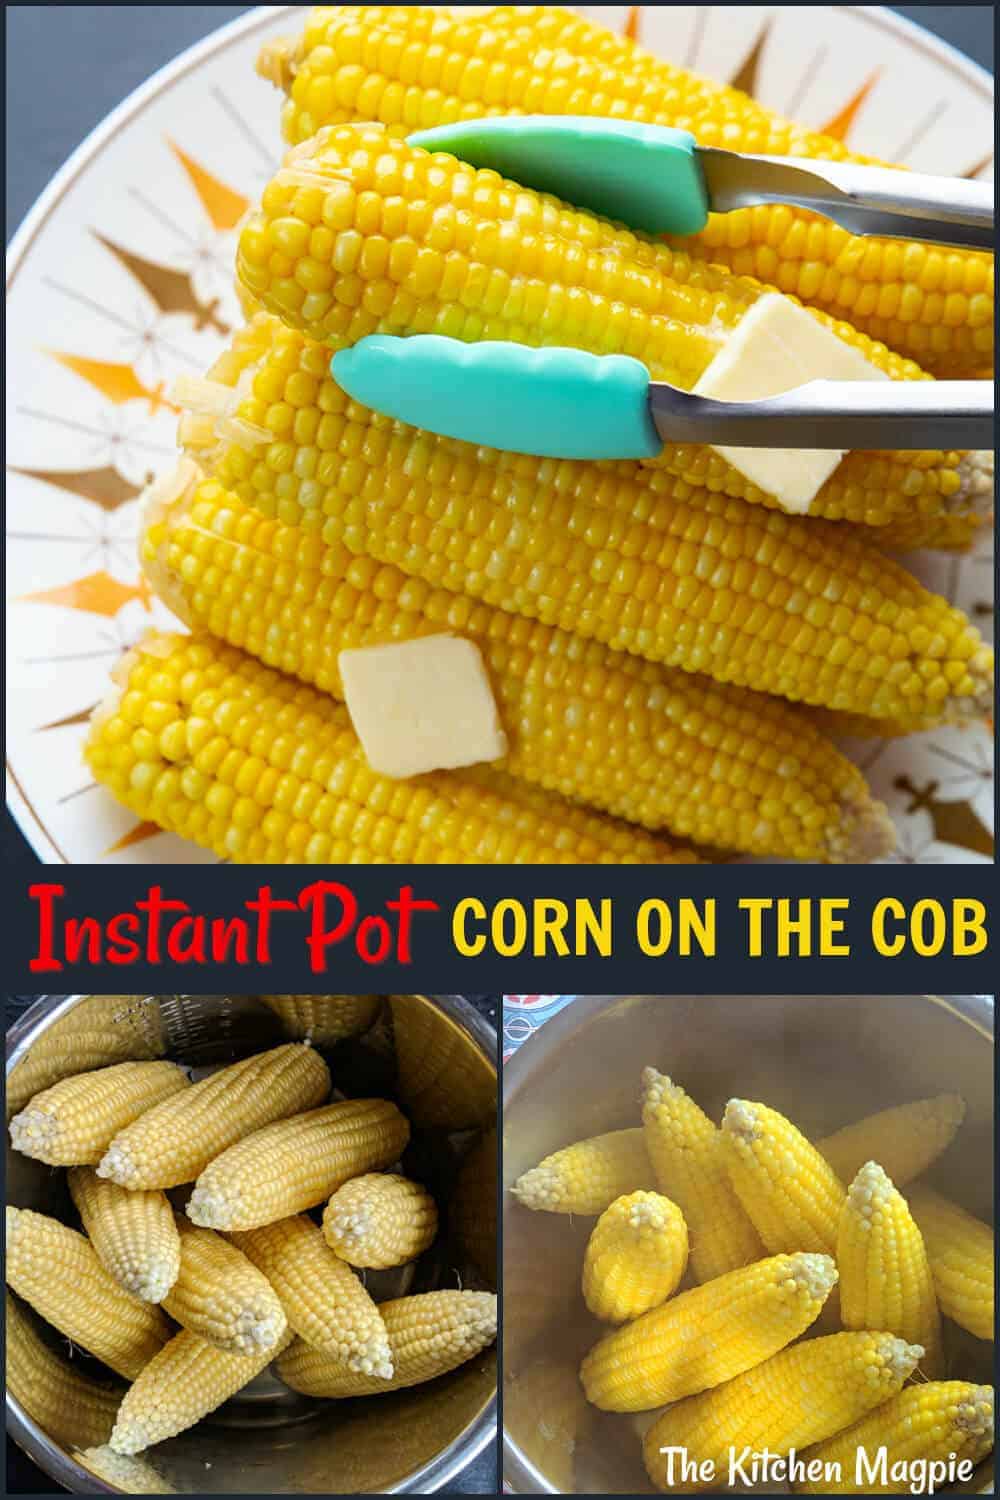 This Instant Pot Corn on the Cob is so easy and fast that you'll never boil it on the stove again! Pressure cooker corn on the cob is perfect!